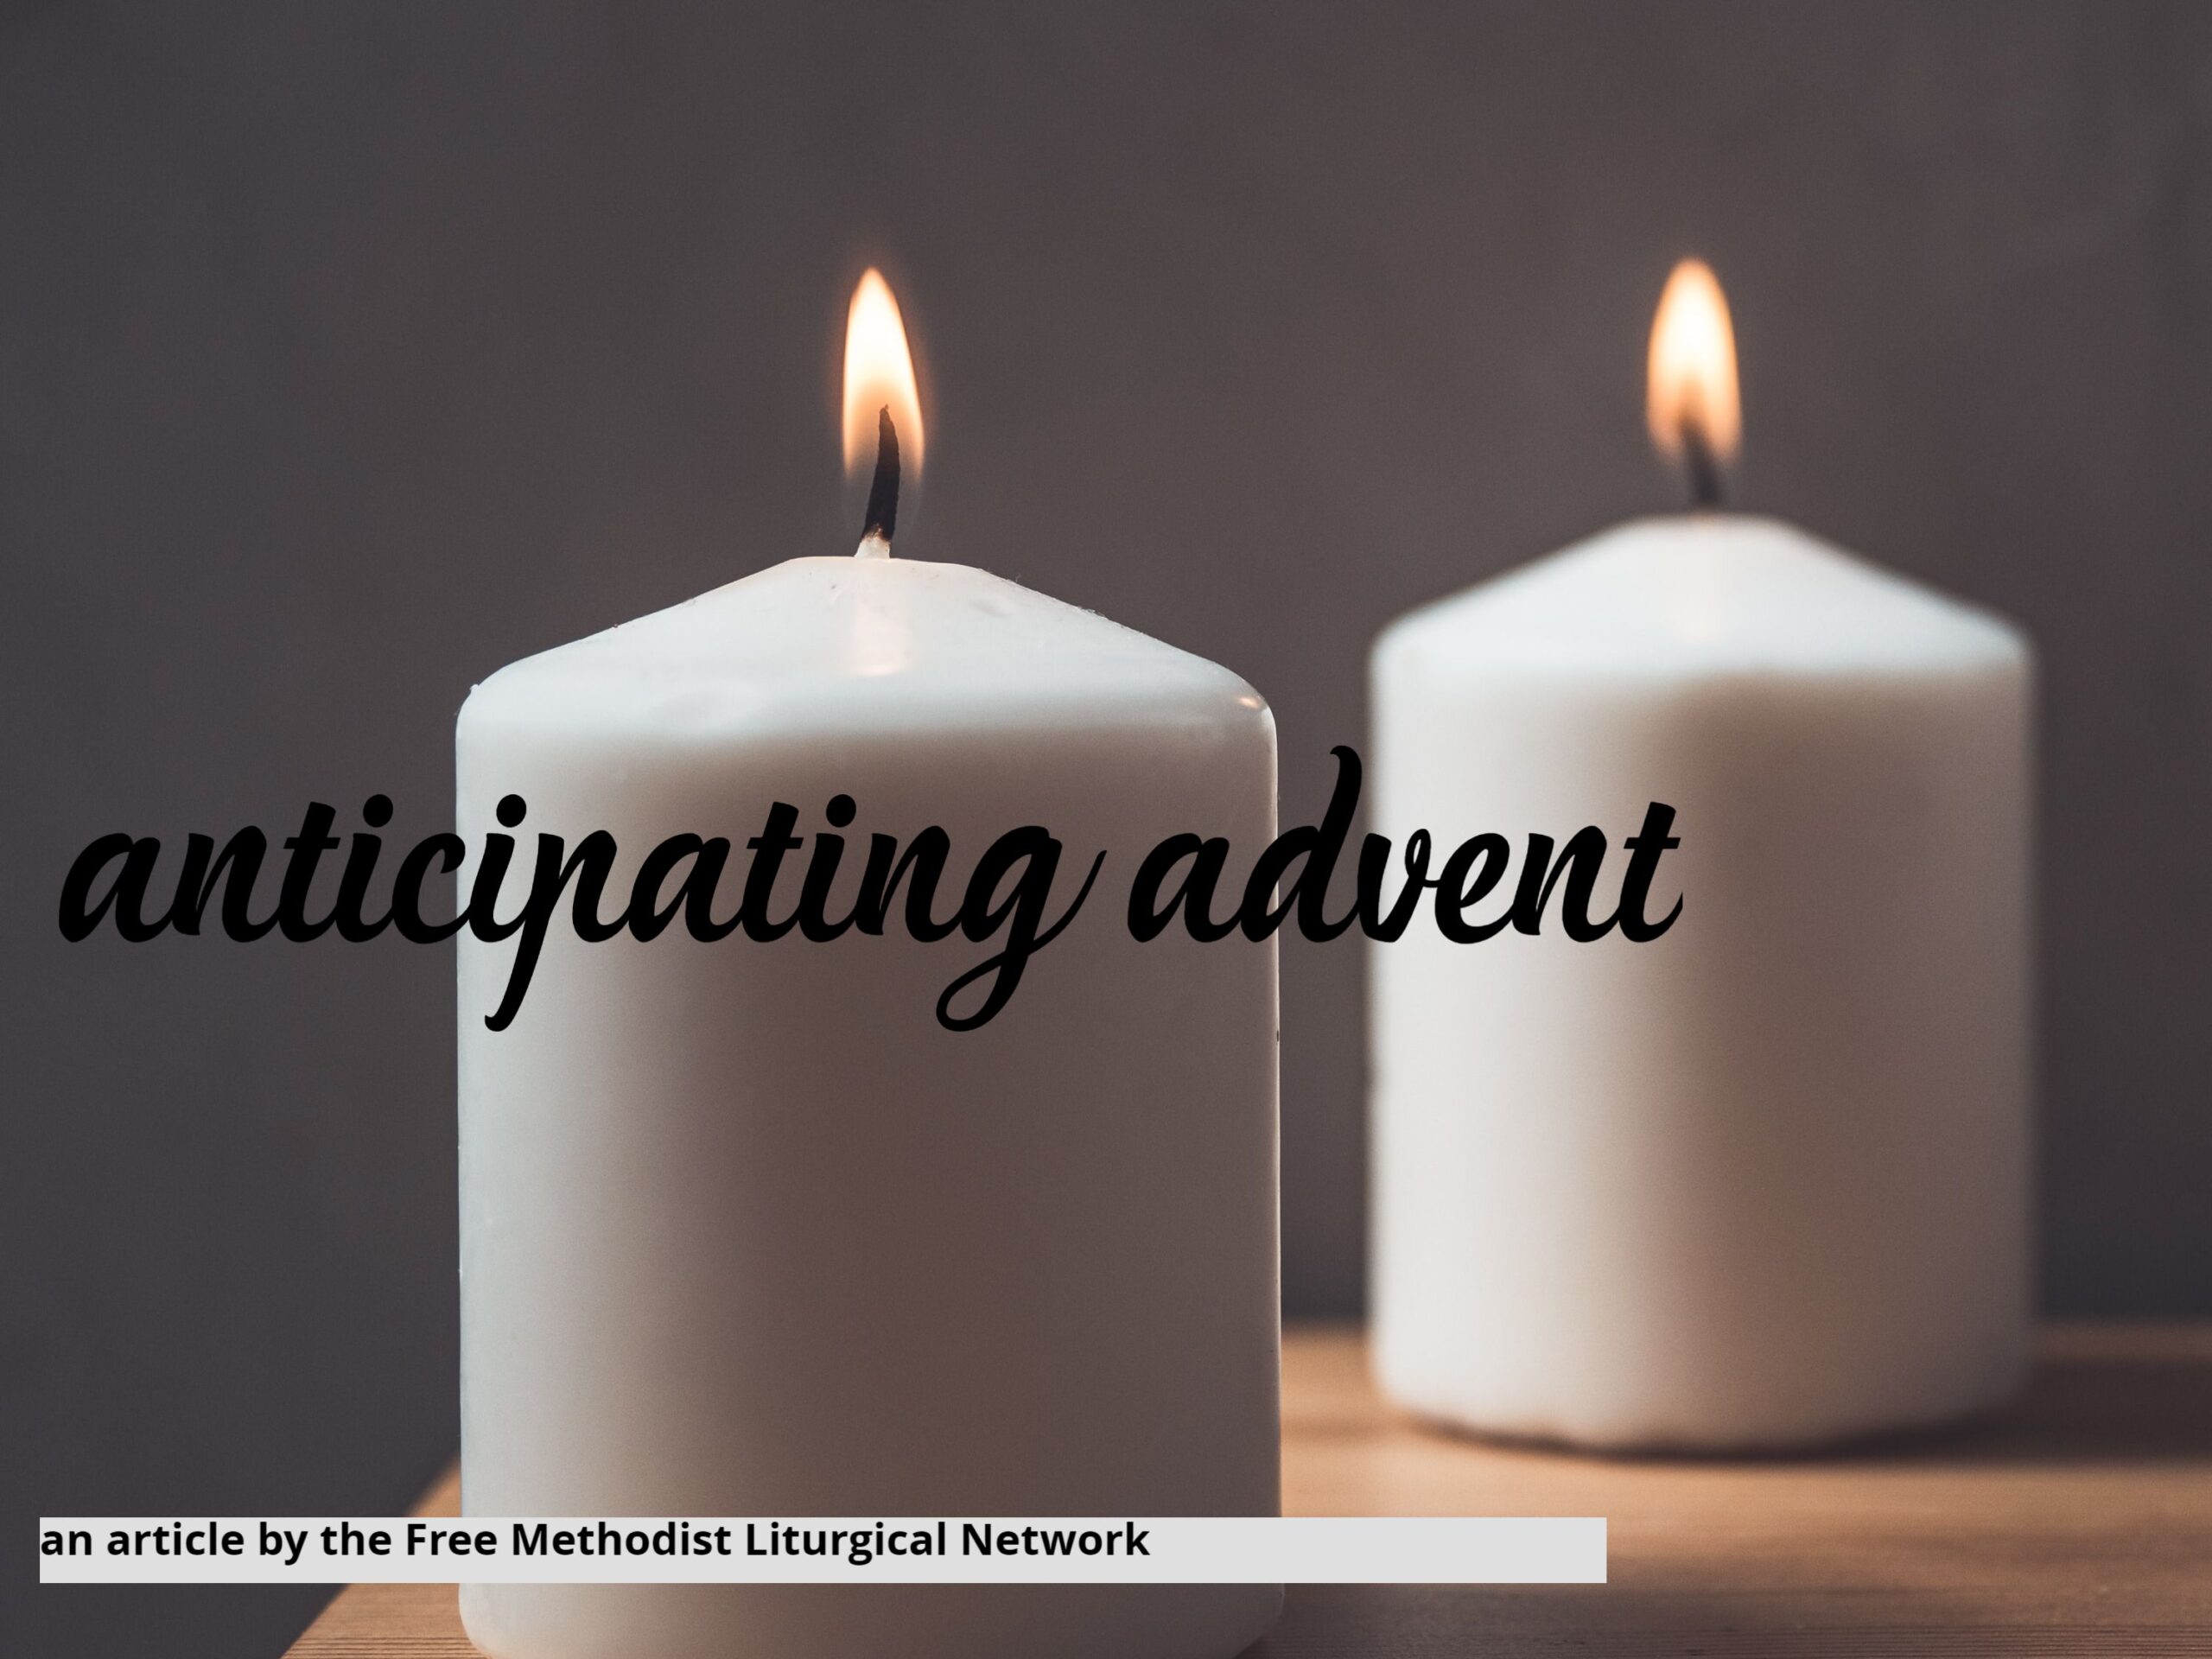 Advent: An Invitation to Wait